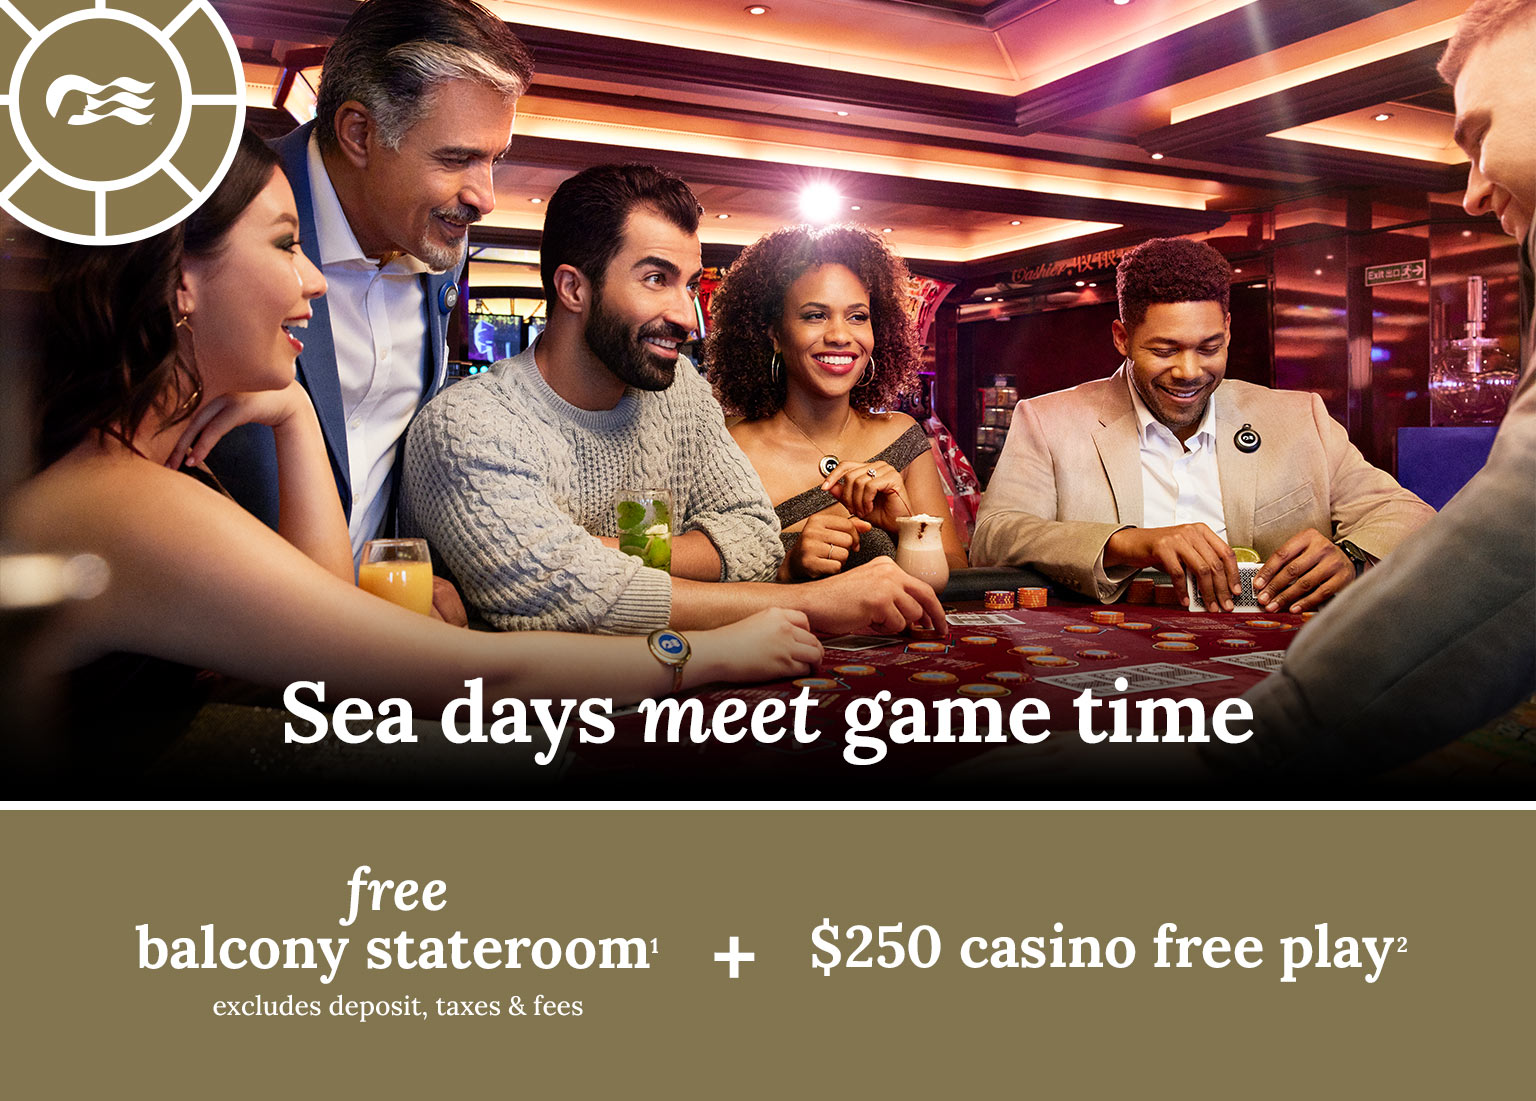 Group of people playing poker. free balcony stateroom + $250 casino free play. Click here to book.